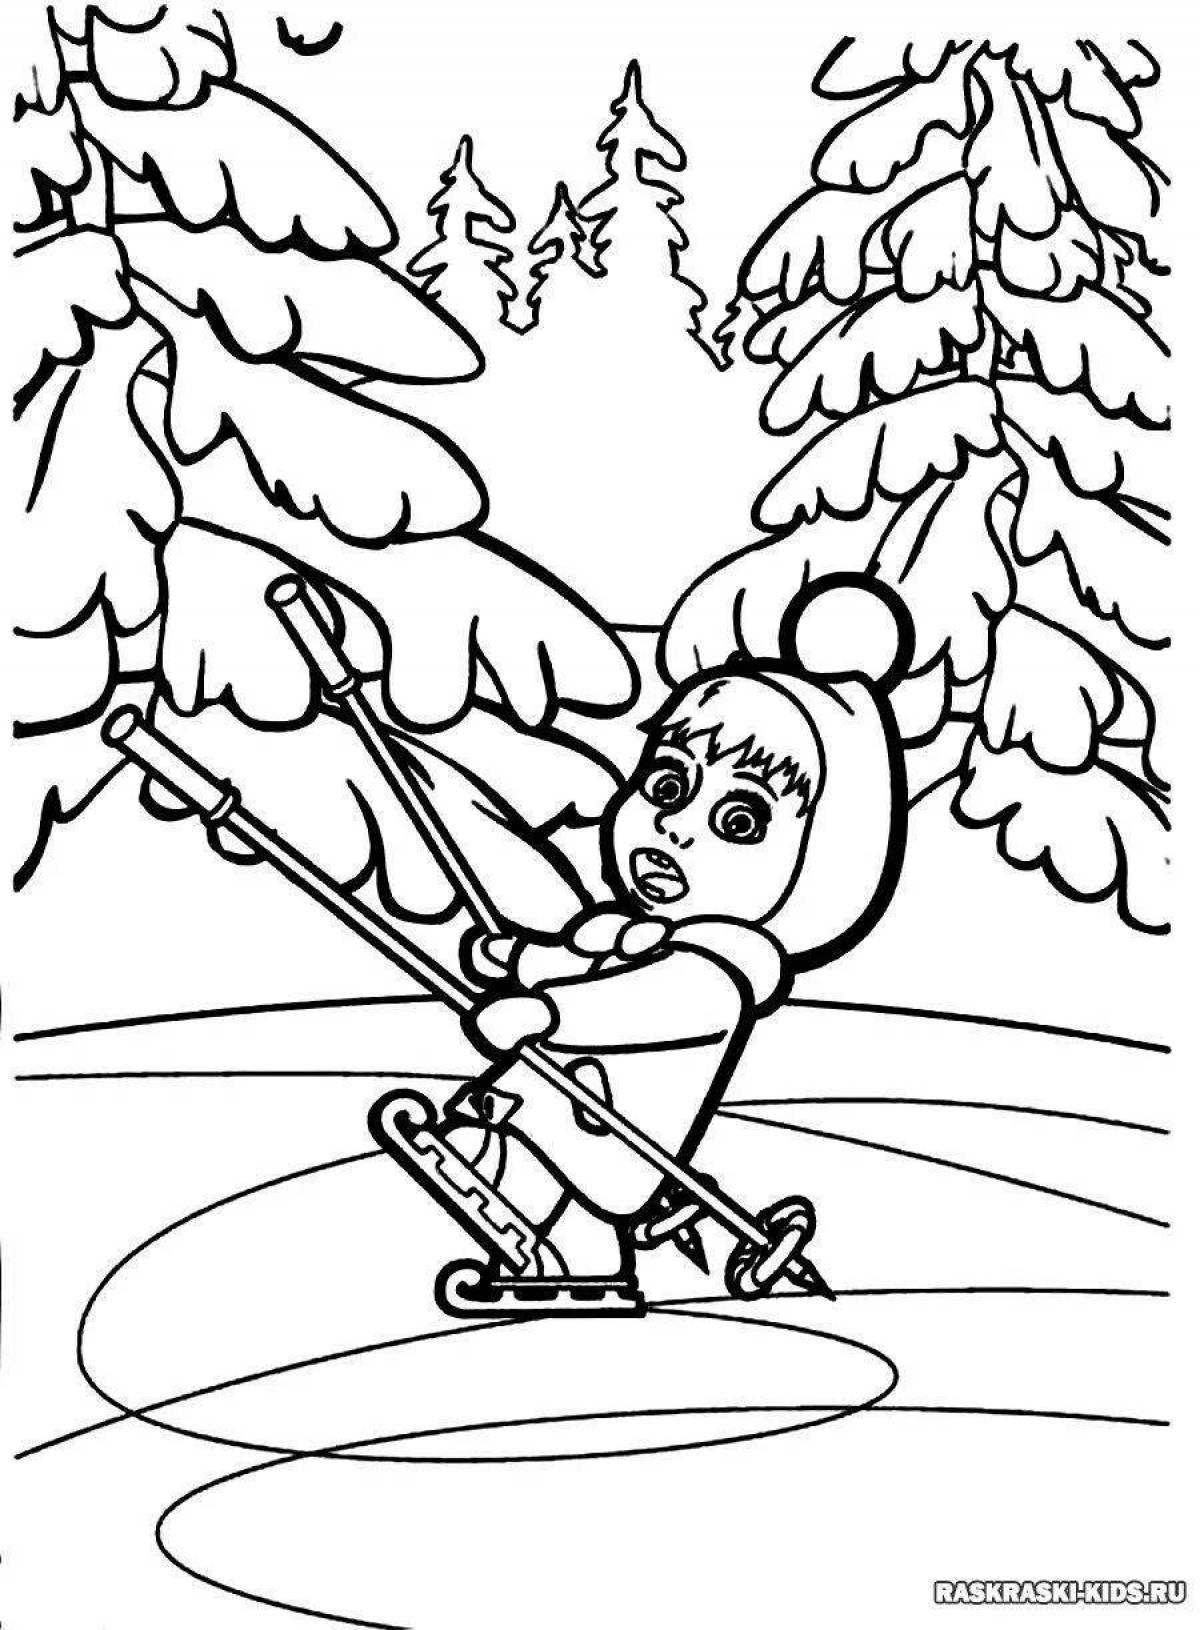 Animated beware the ice coloring page